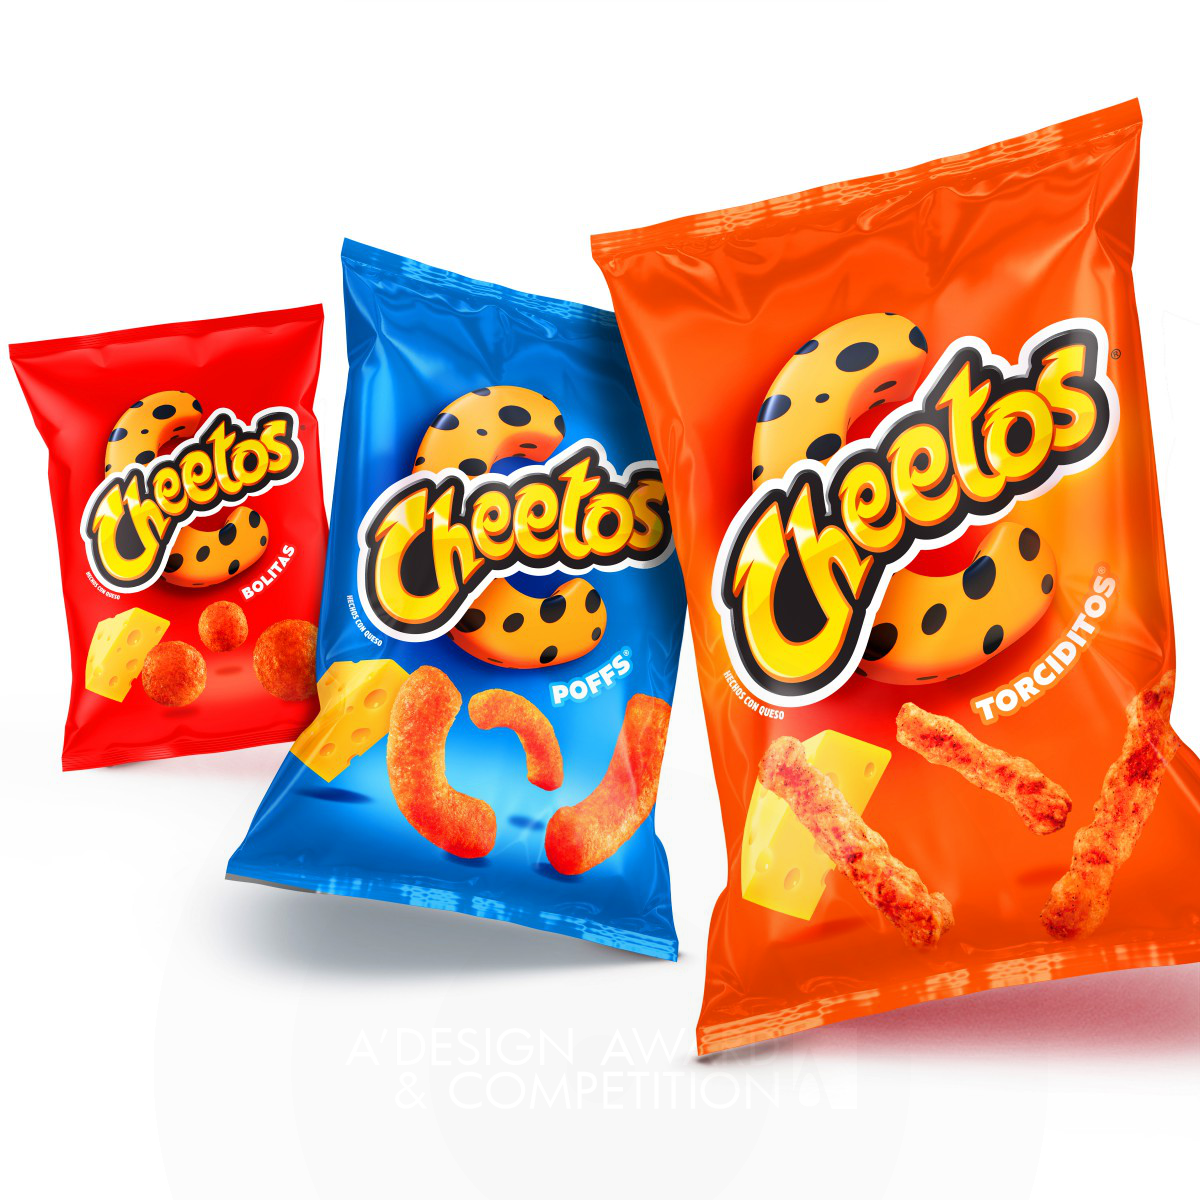 Cheetos Redesign Packaging by Dennis Furniss